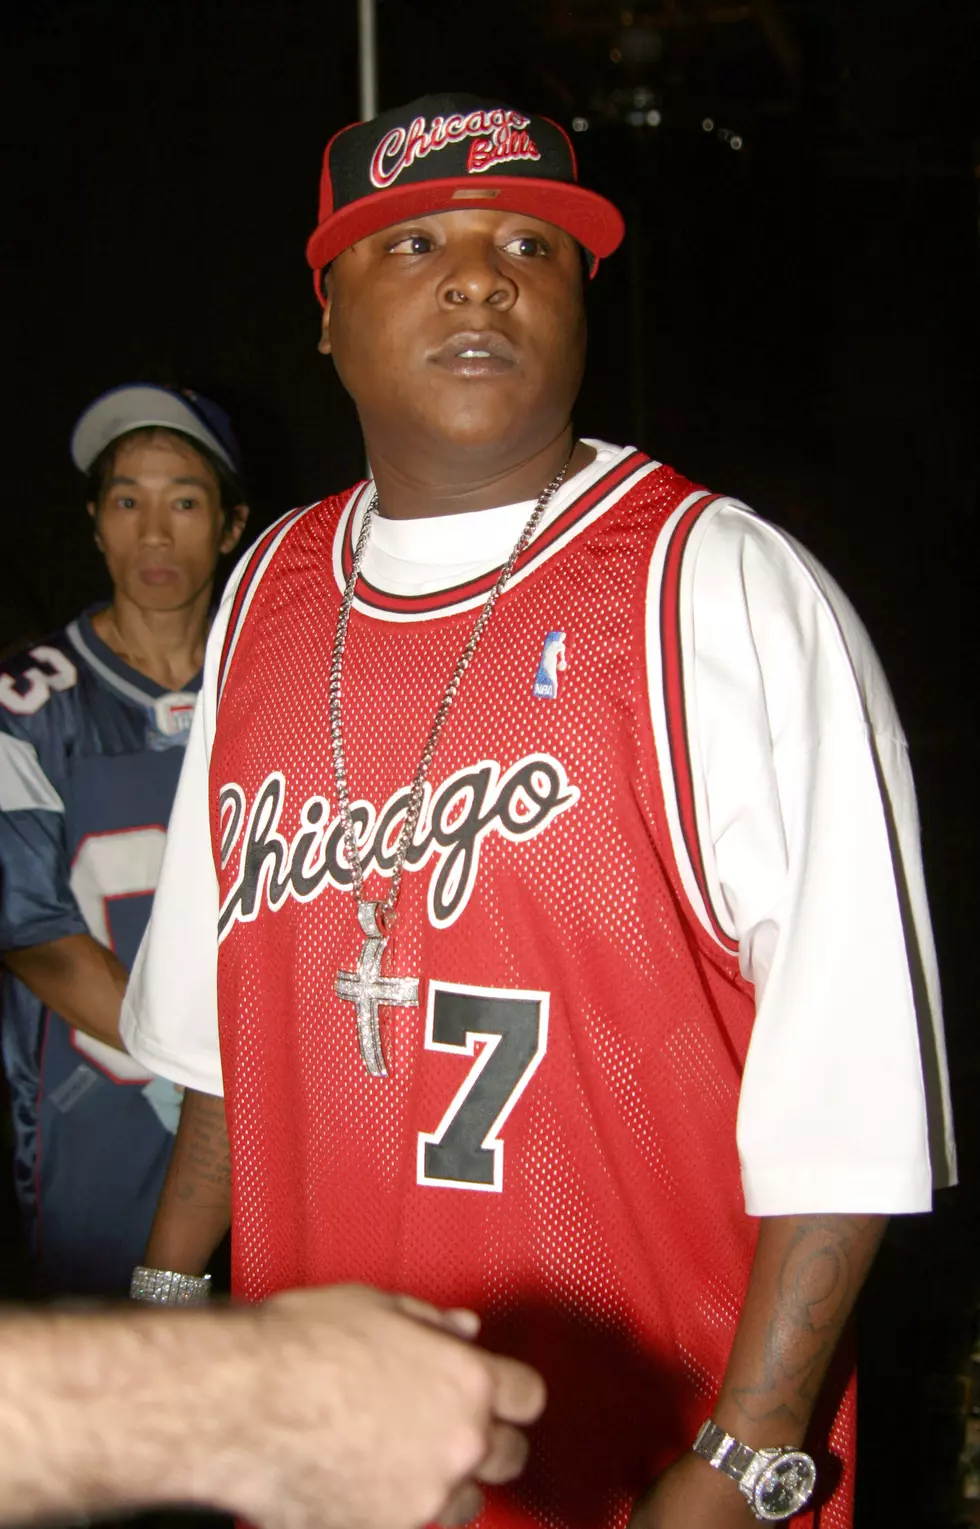 Remember When Rappers Loved Wearing Sports Jerseys All the Time? - XXL